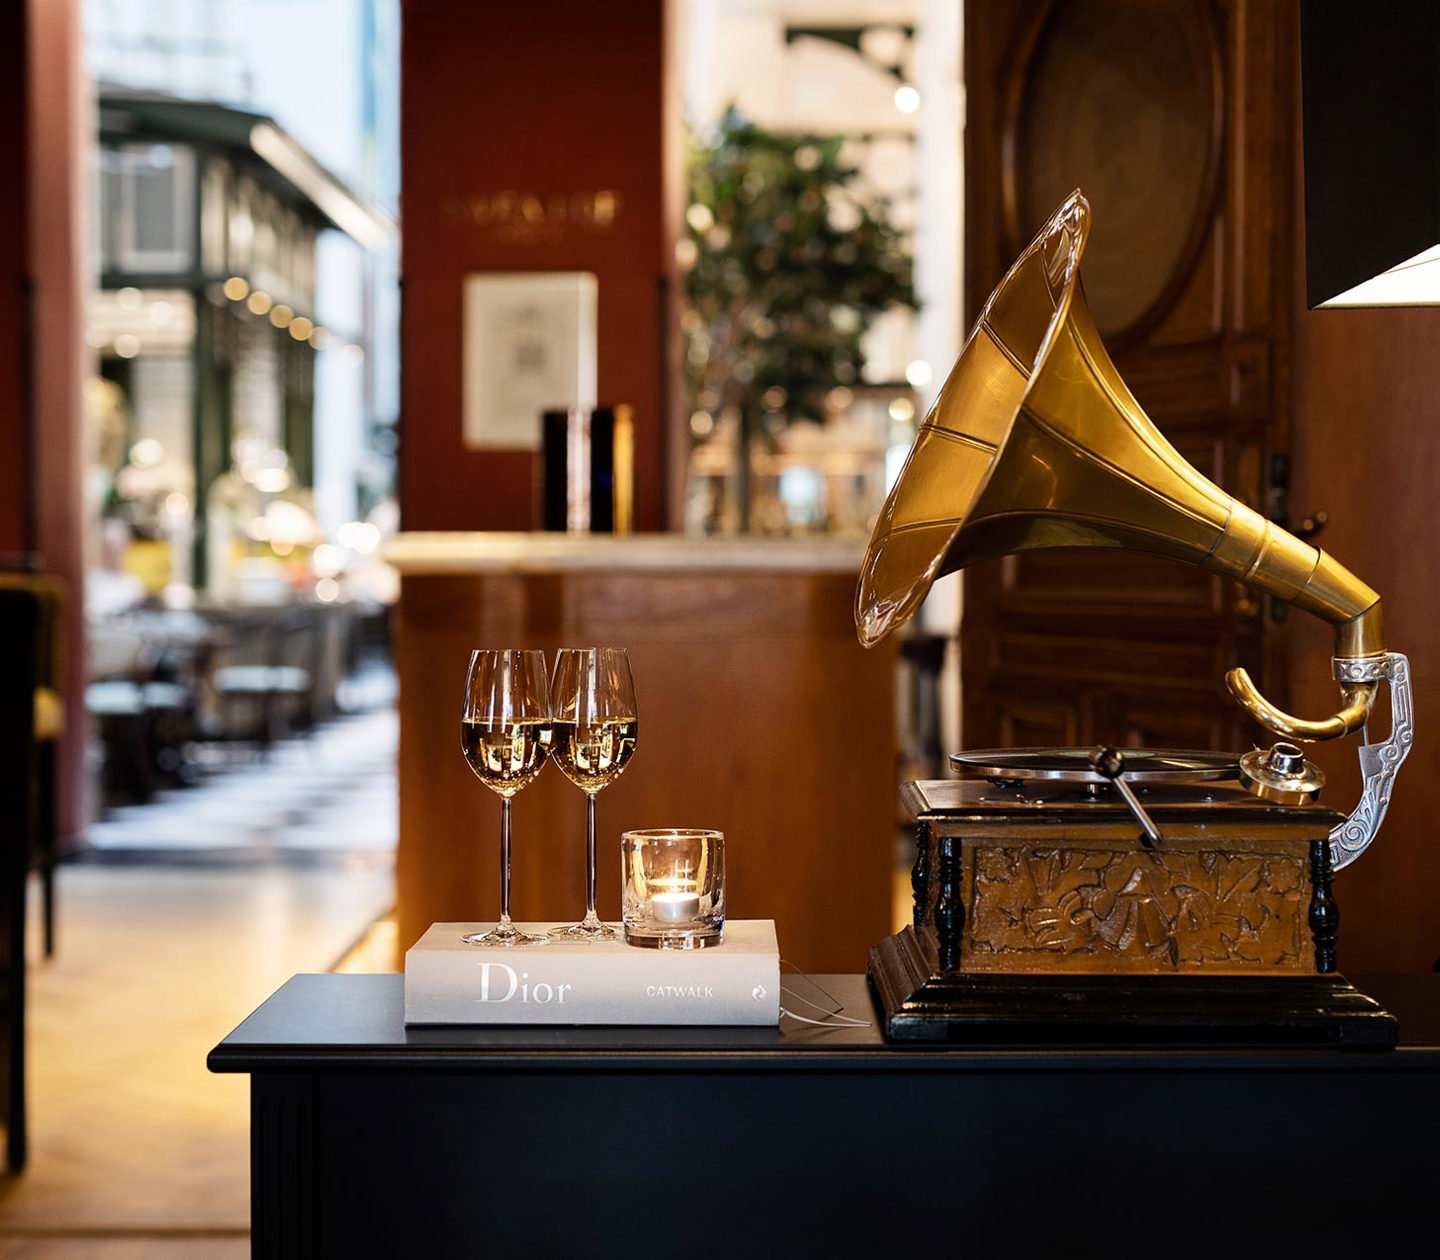 Two champagne glasses and a gramophone player